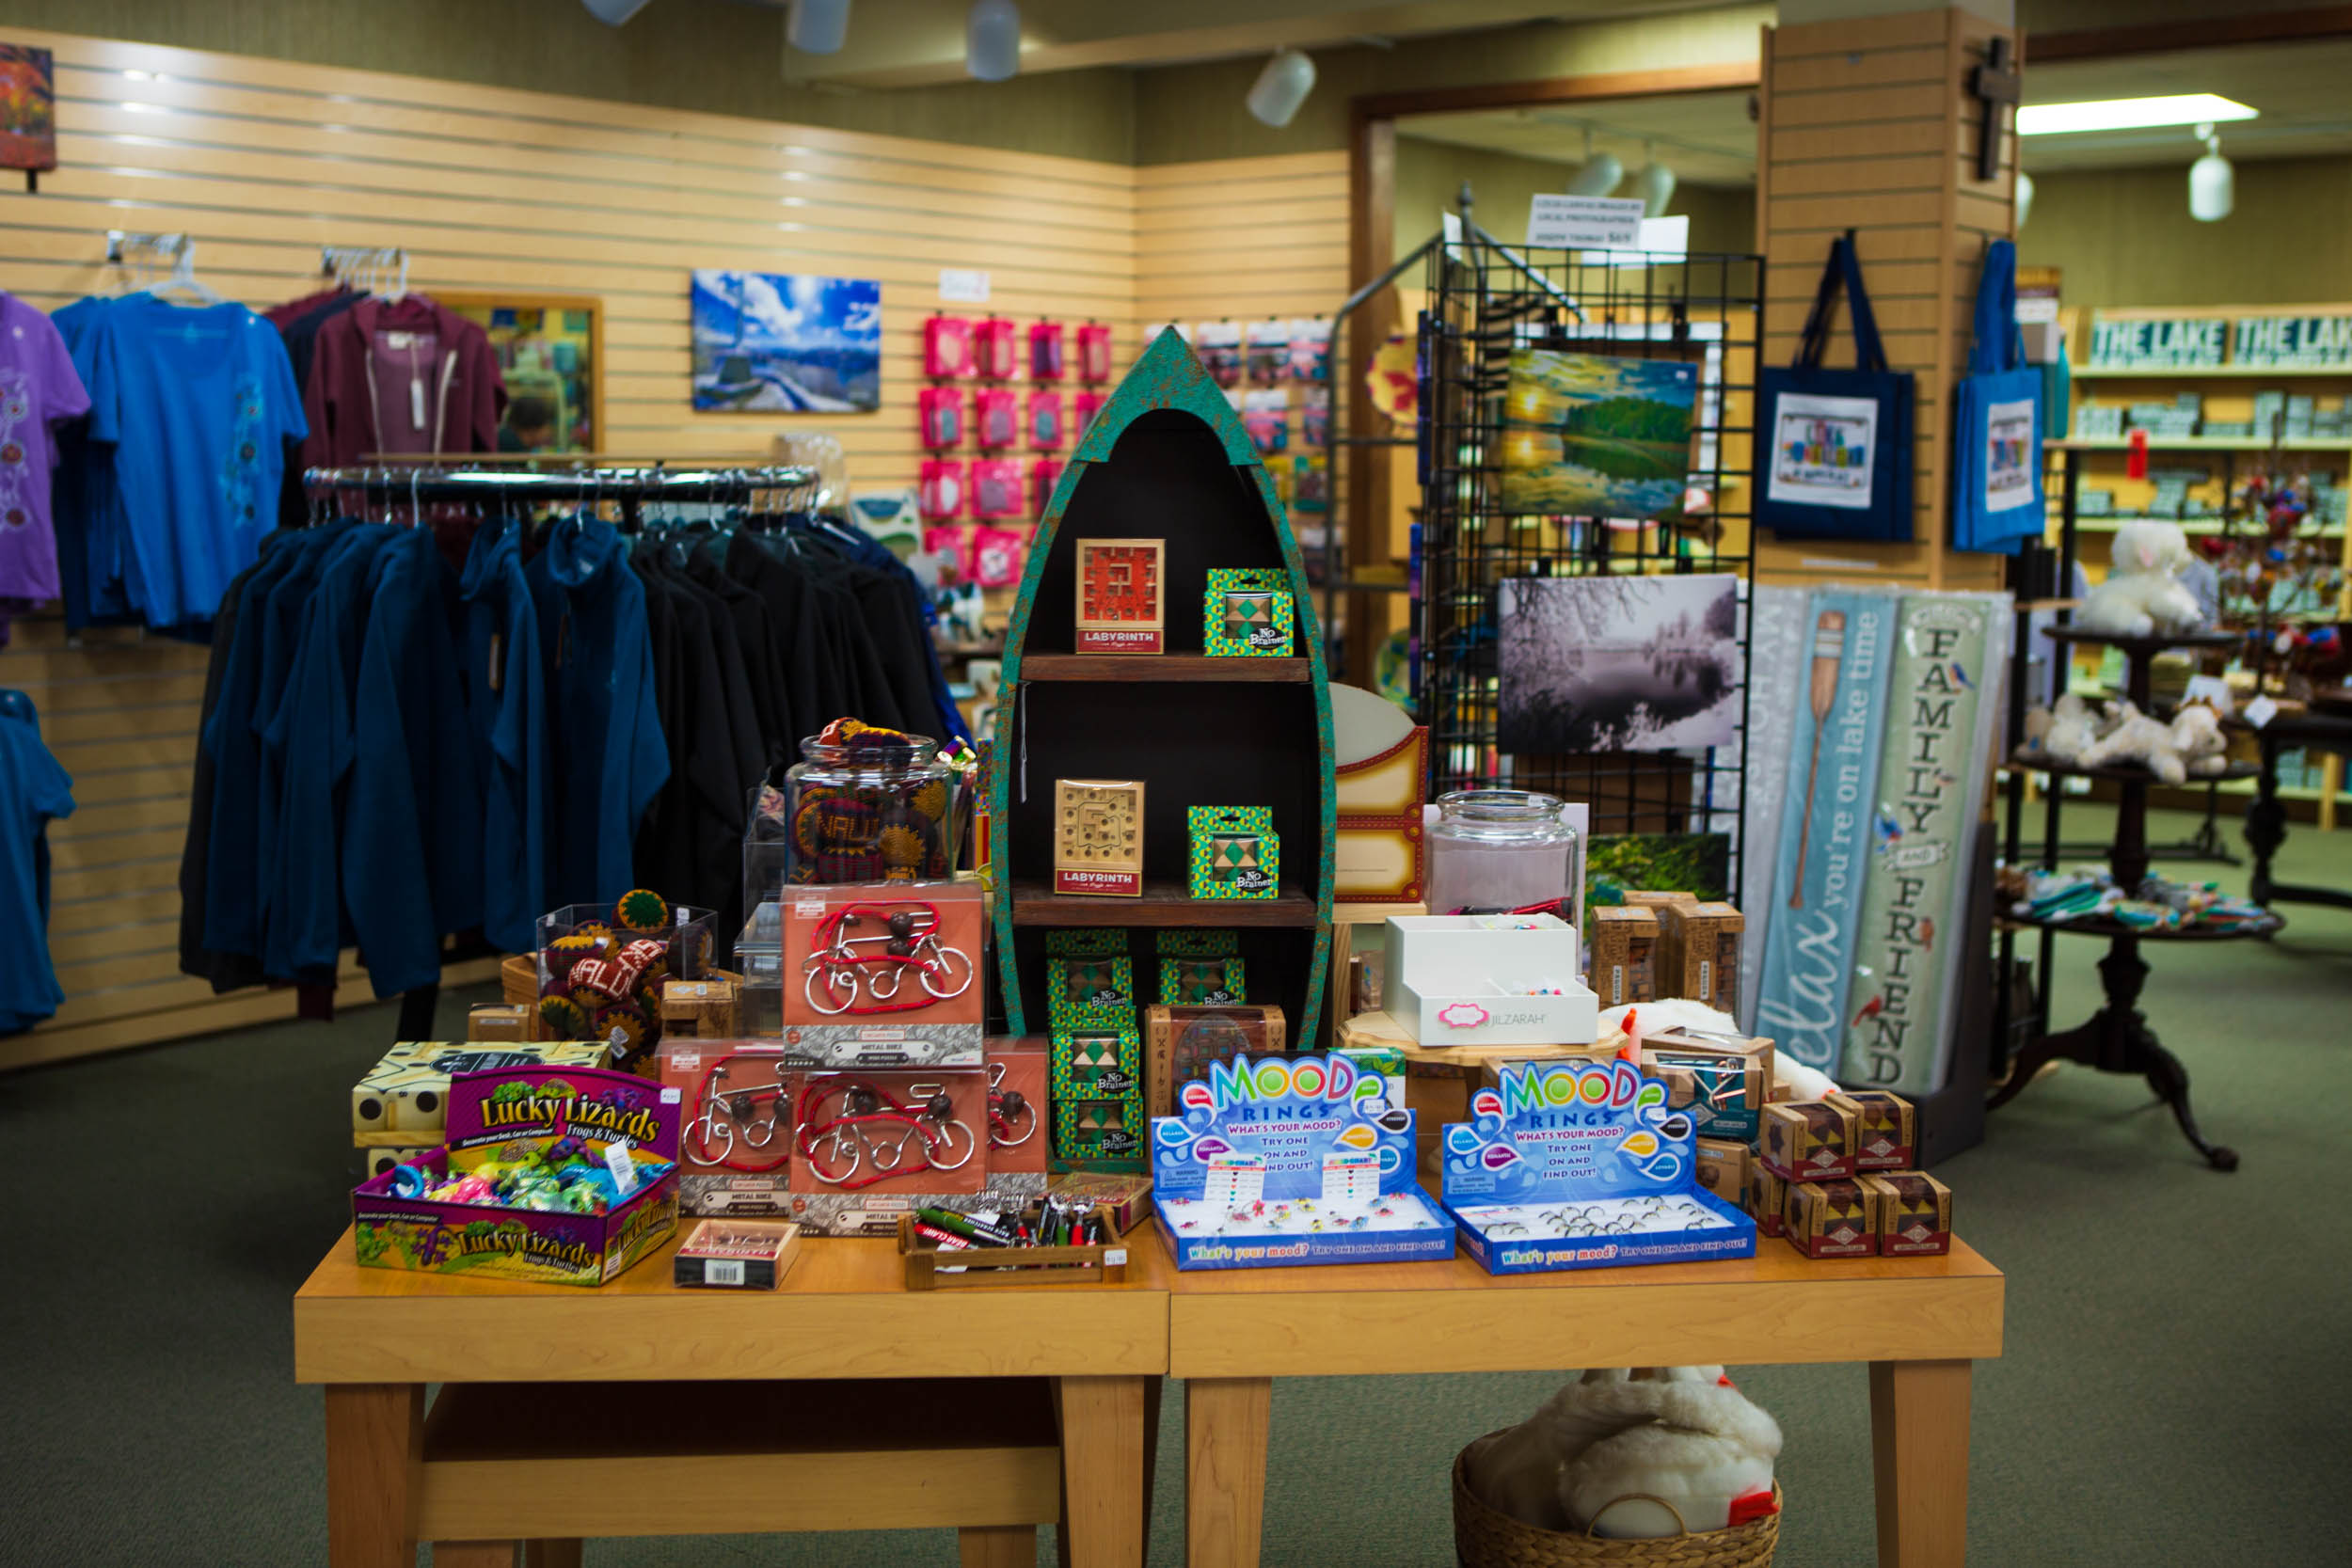 Merchandise displayed at Junaluska Gifts and Grounds